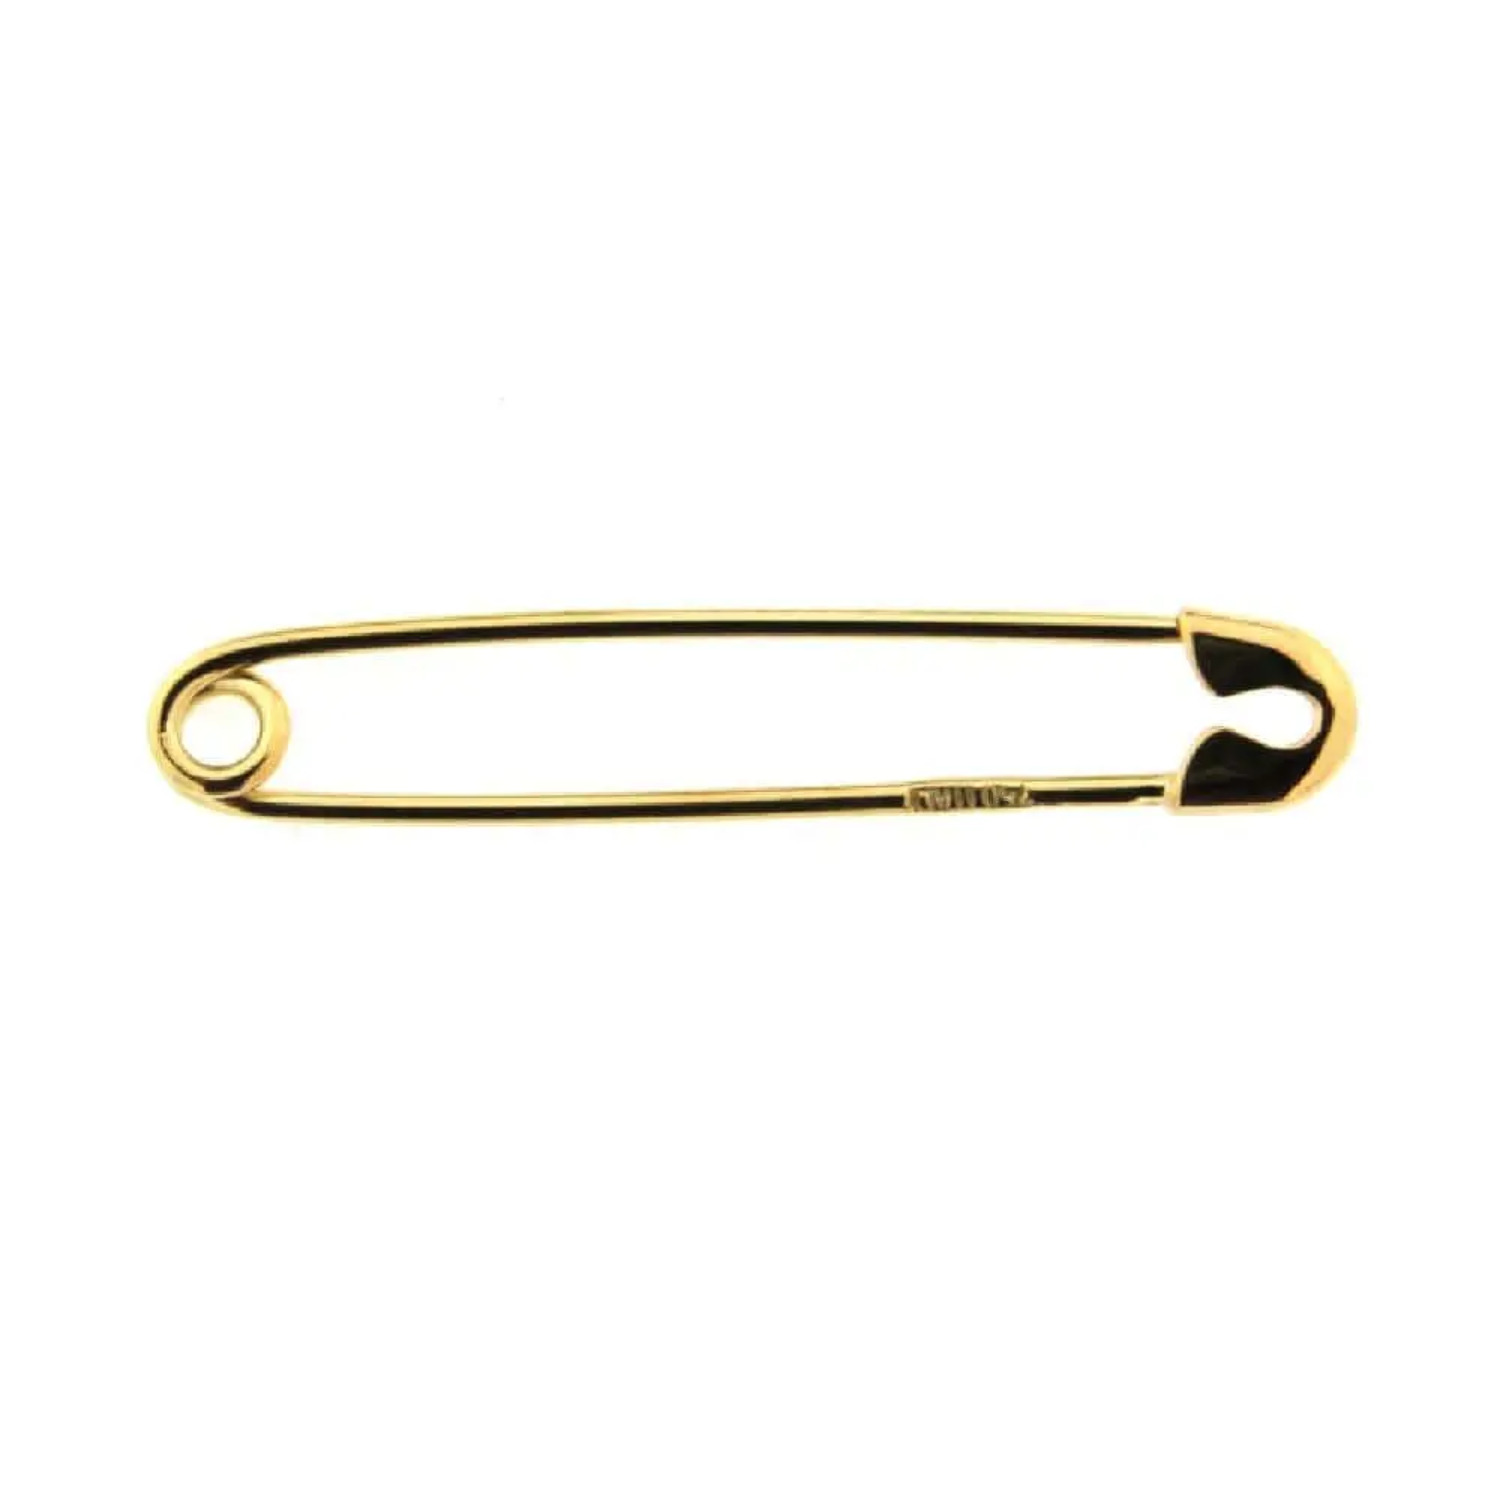 18K Solid Yellow Gold Large Safety Pin 1.30 inch - image 1 of 4